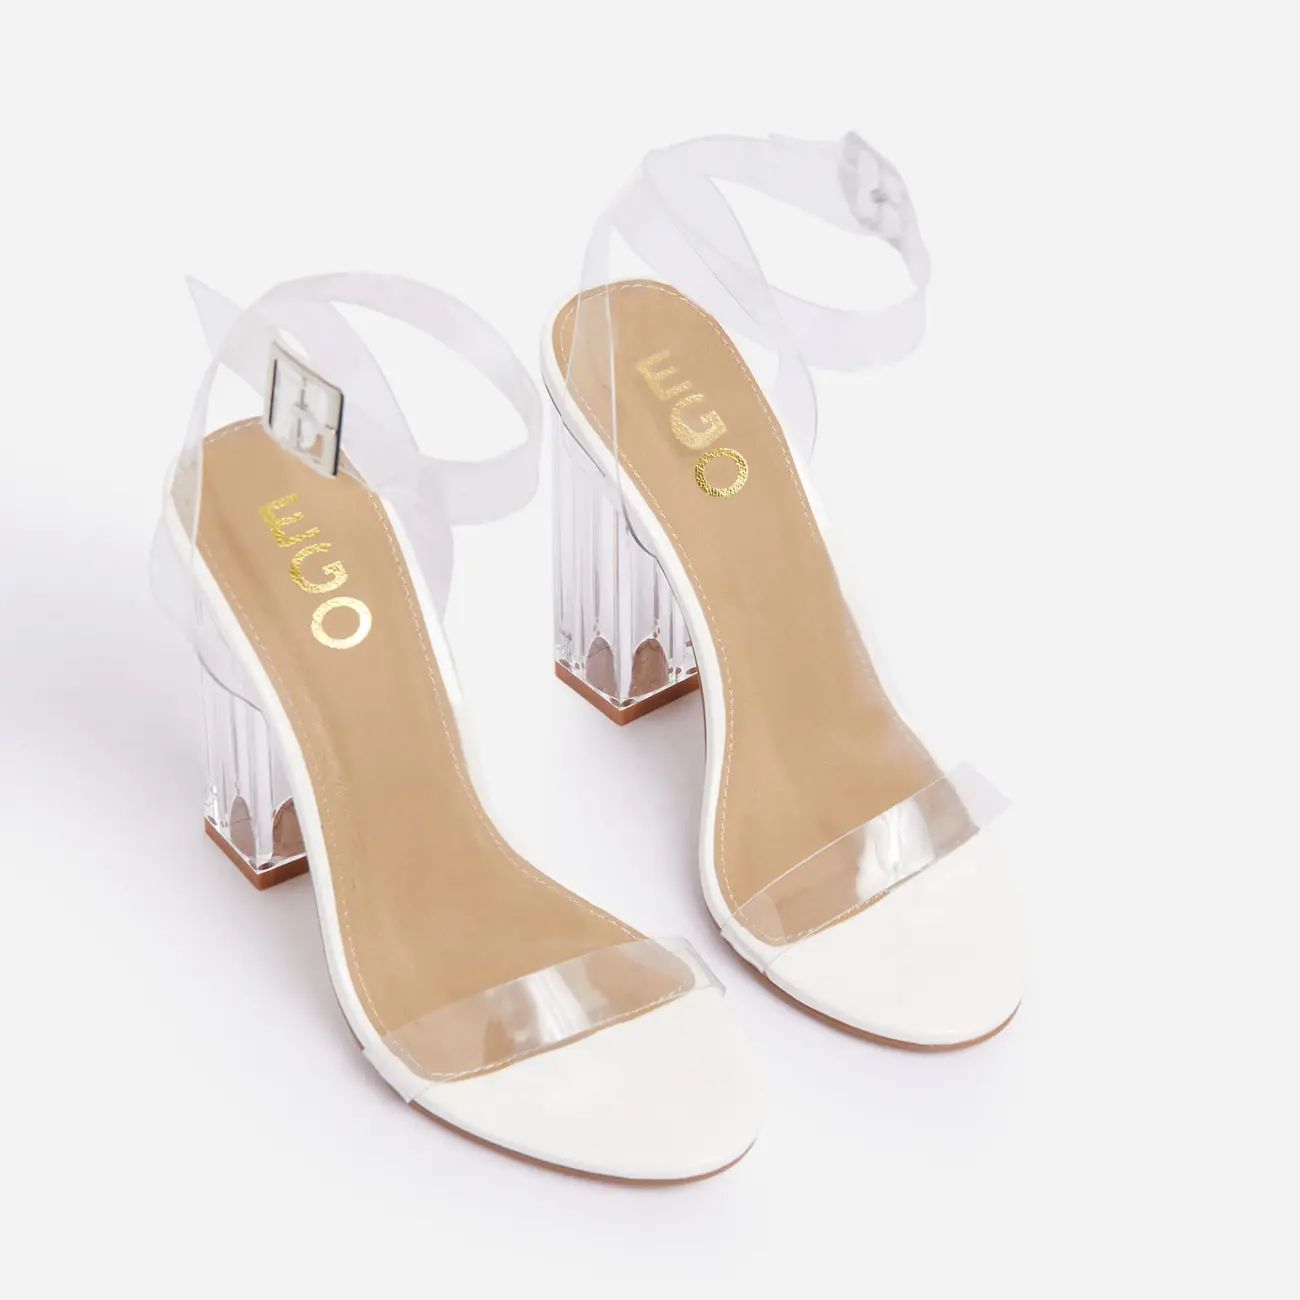 Mercie Barely There Perspex Block Clear Heel In White Patent | EGO Shoes (US & Canada)